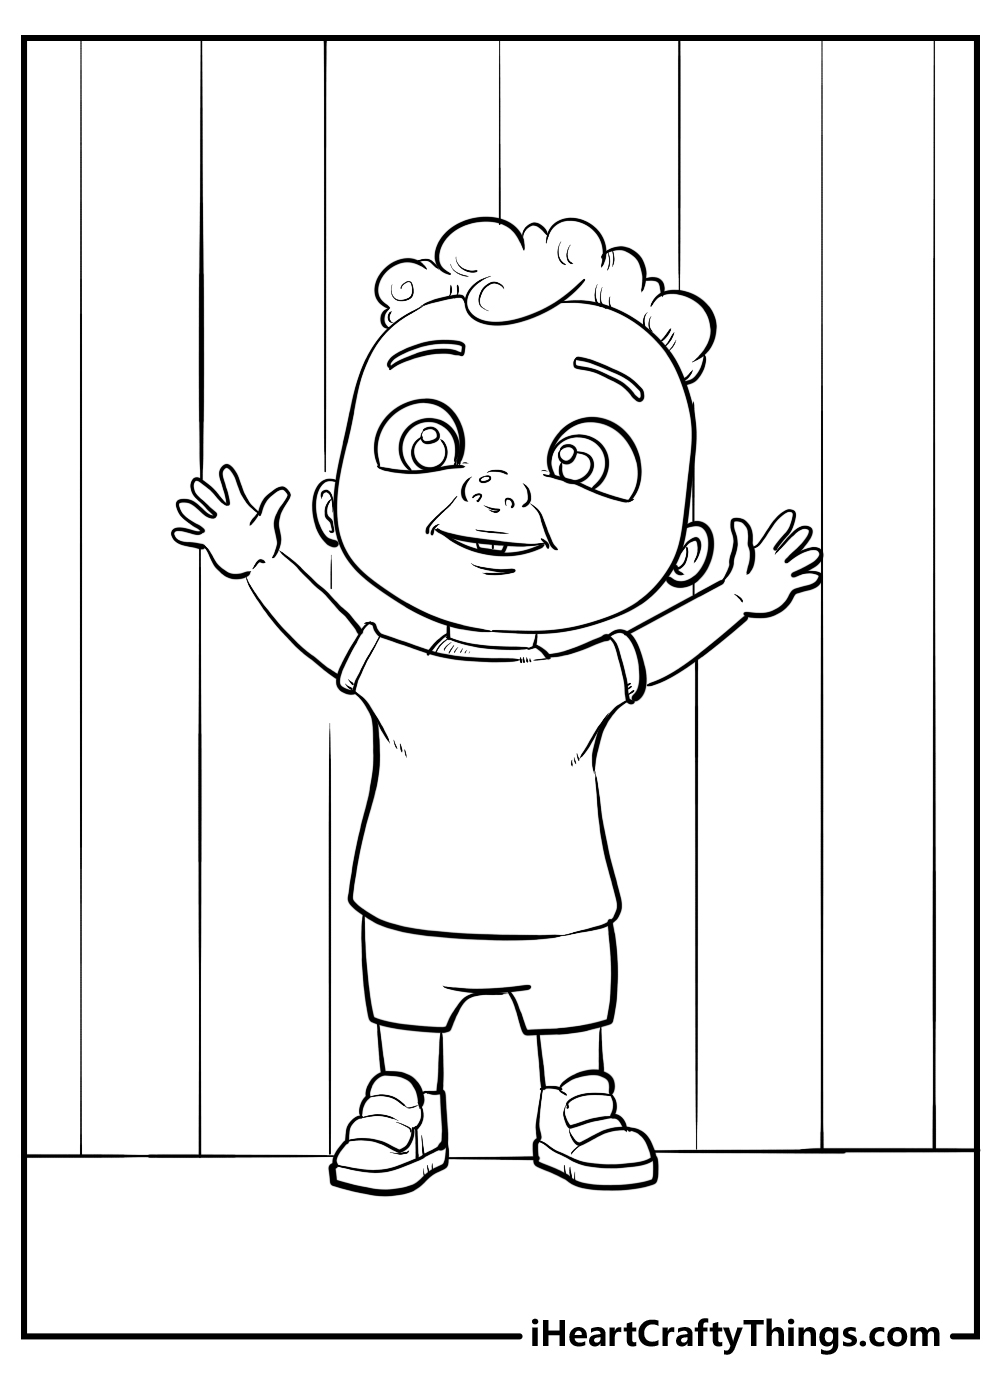 cocomelon boy coloring sheet free download